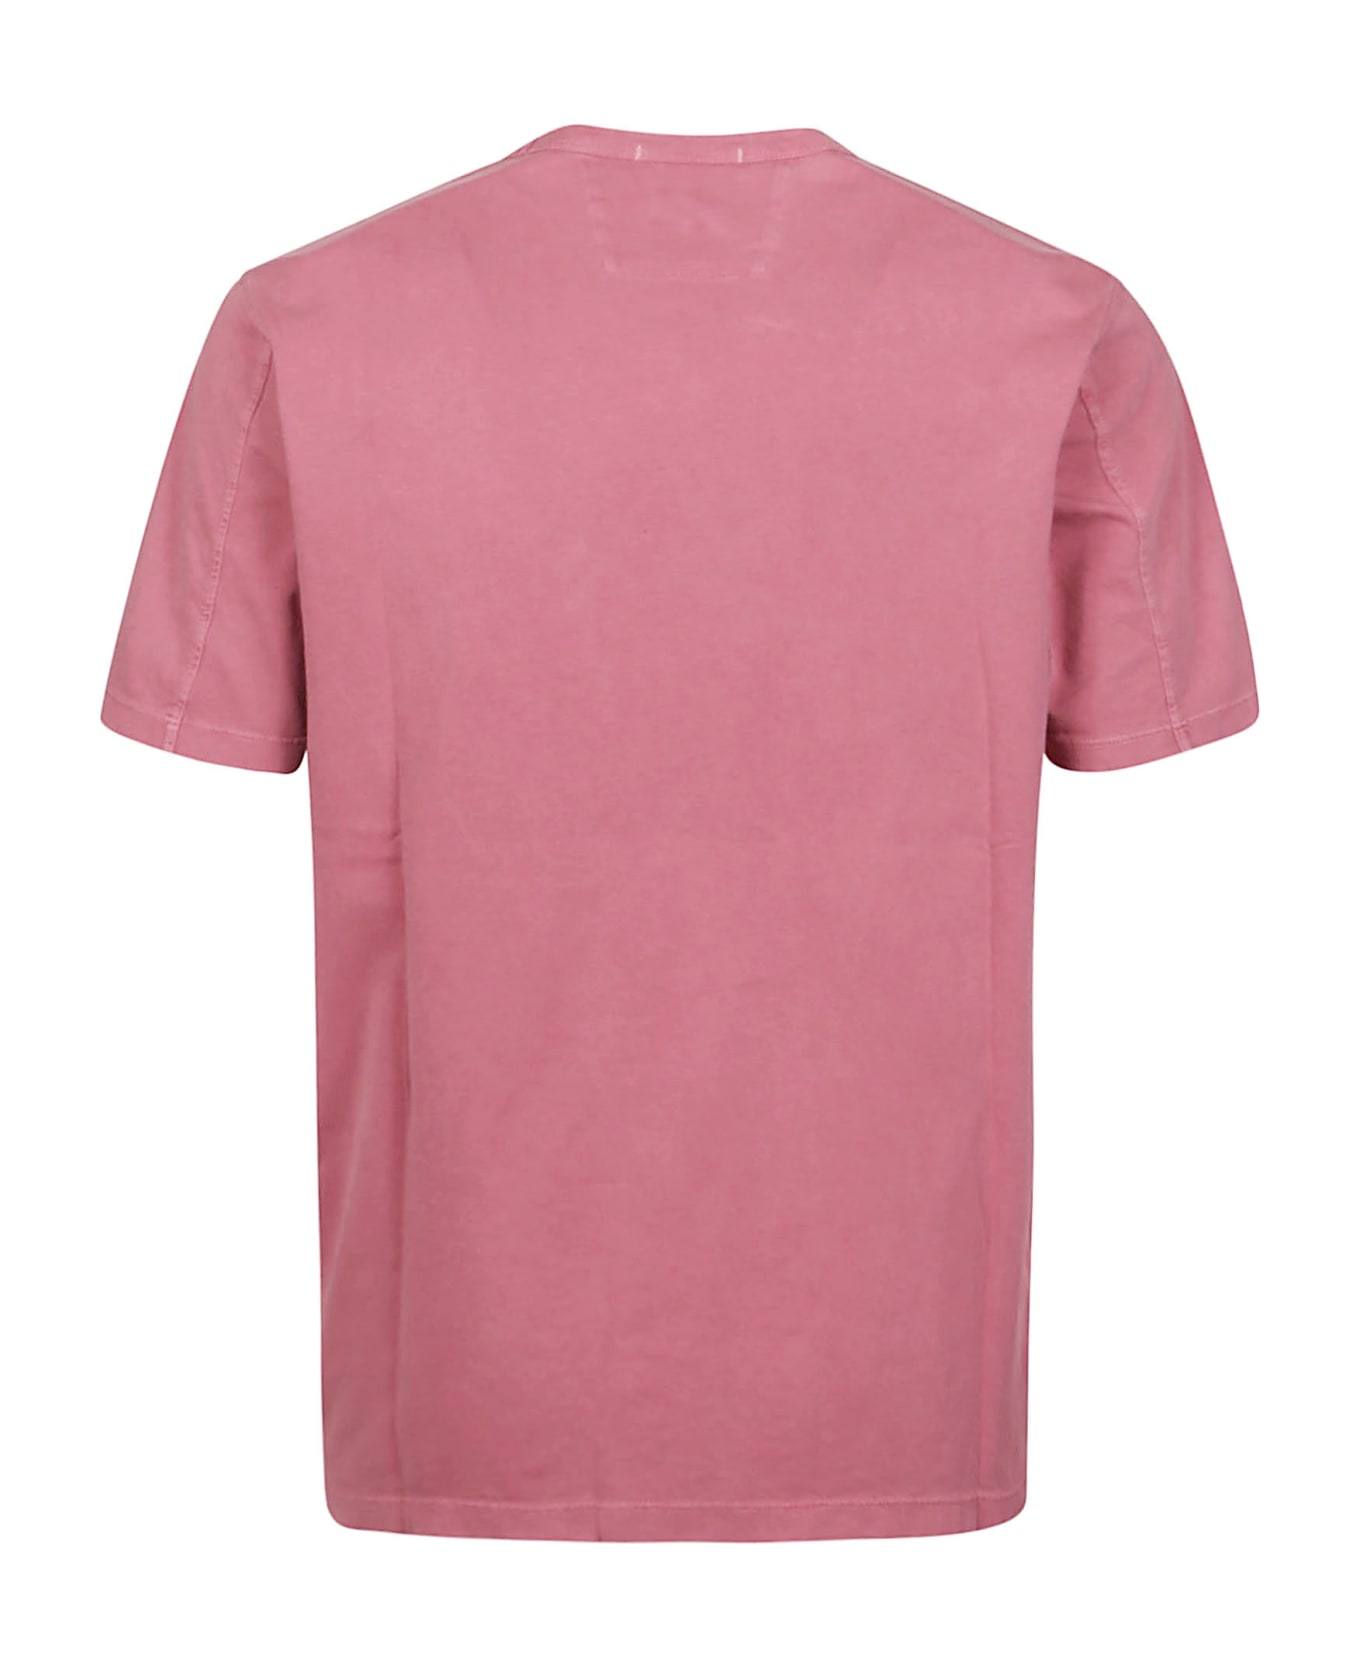 C.P. Company 24/1 Jersey Resist Dyed Logo T-shirt - Red Bud